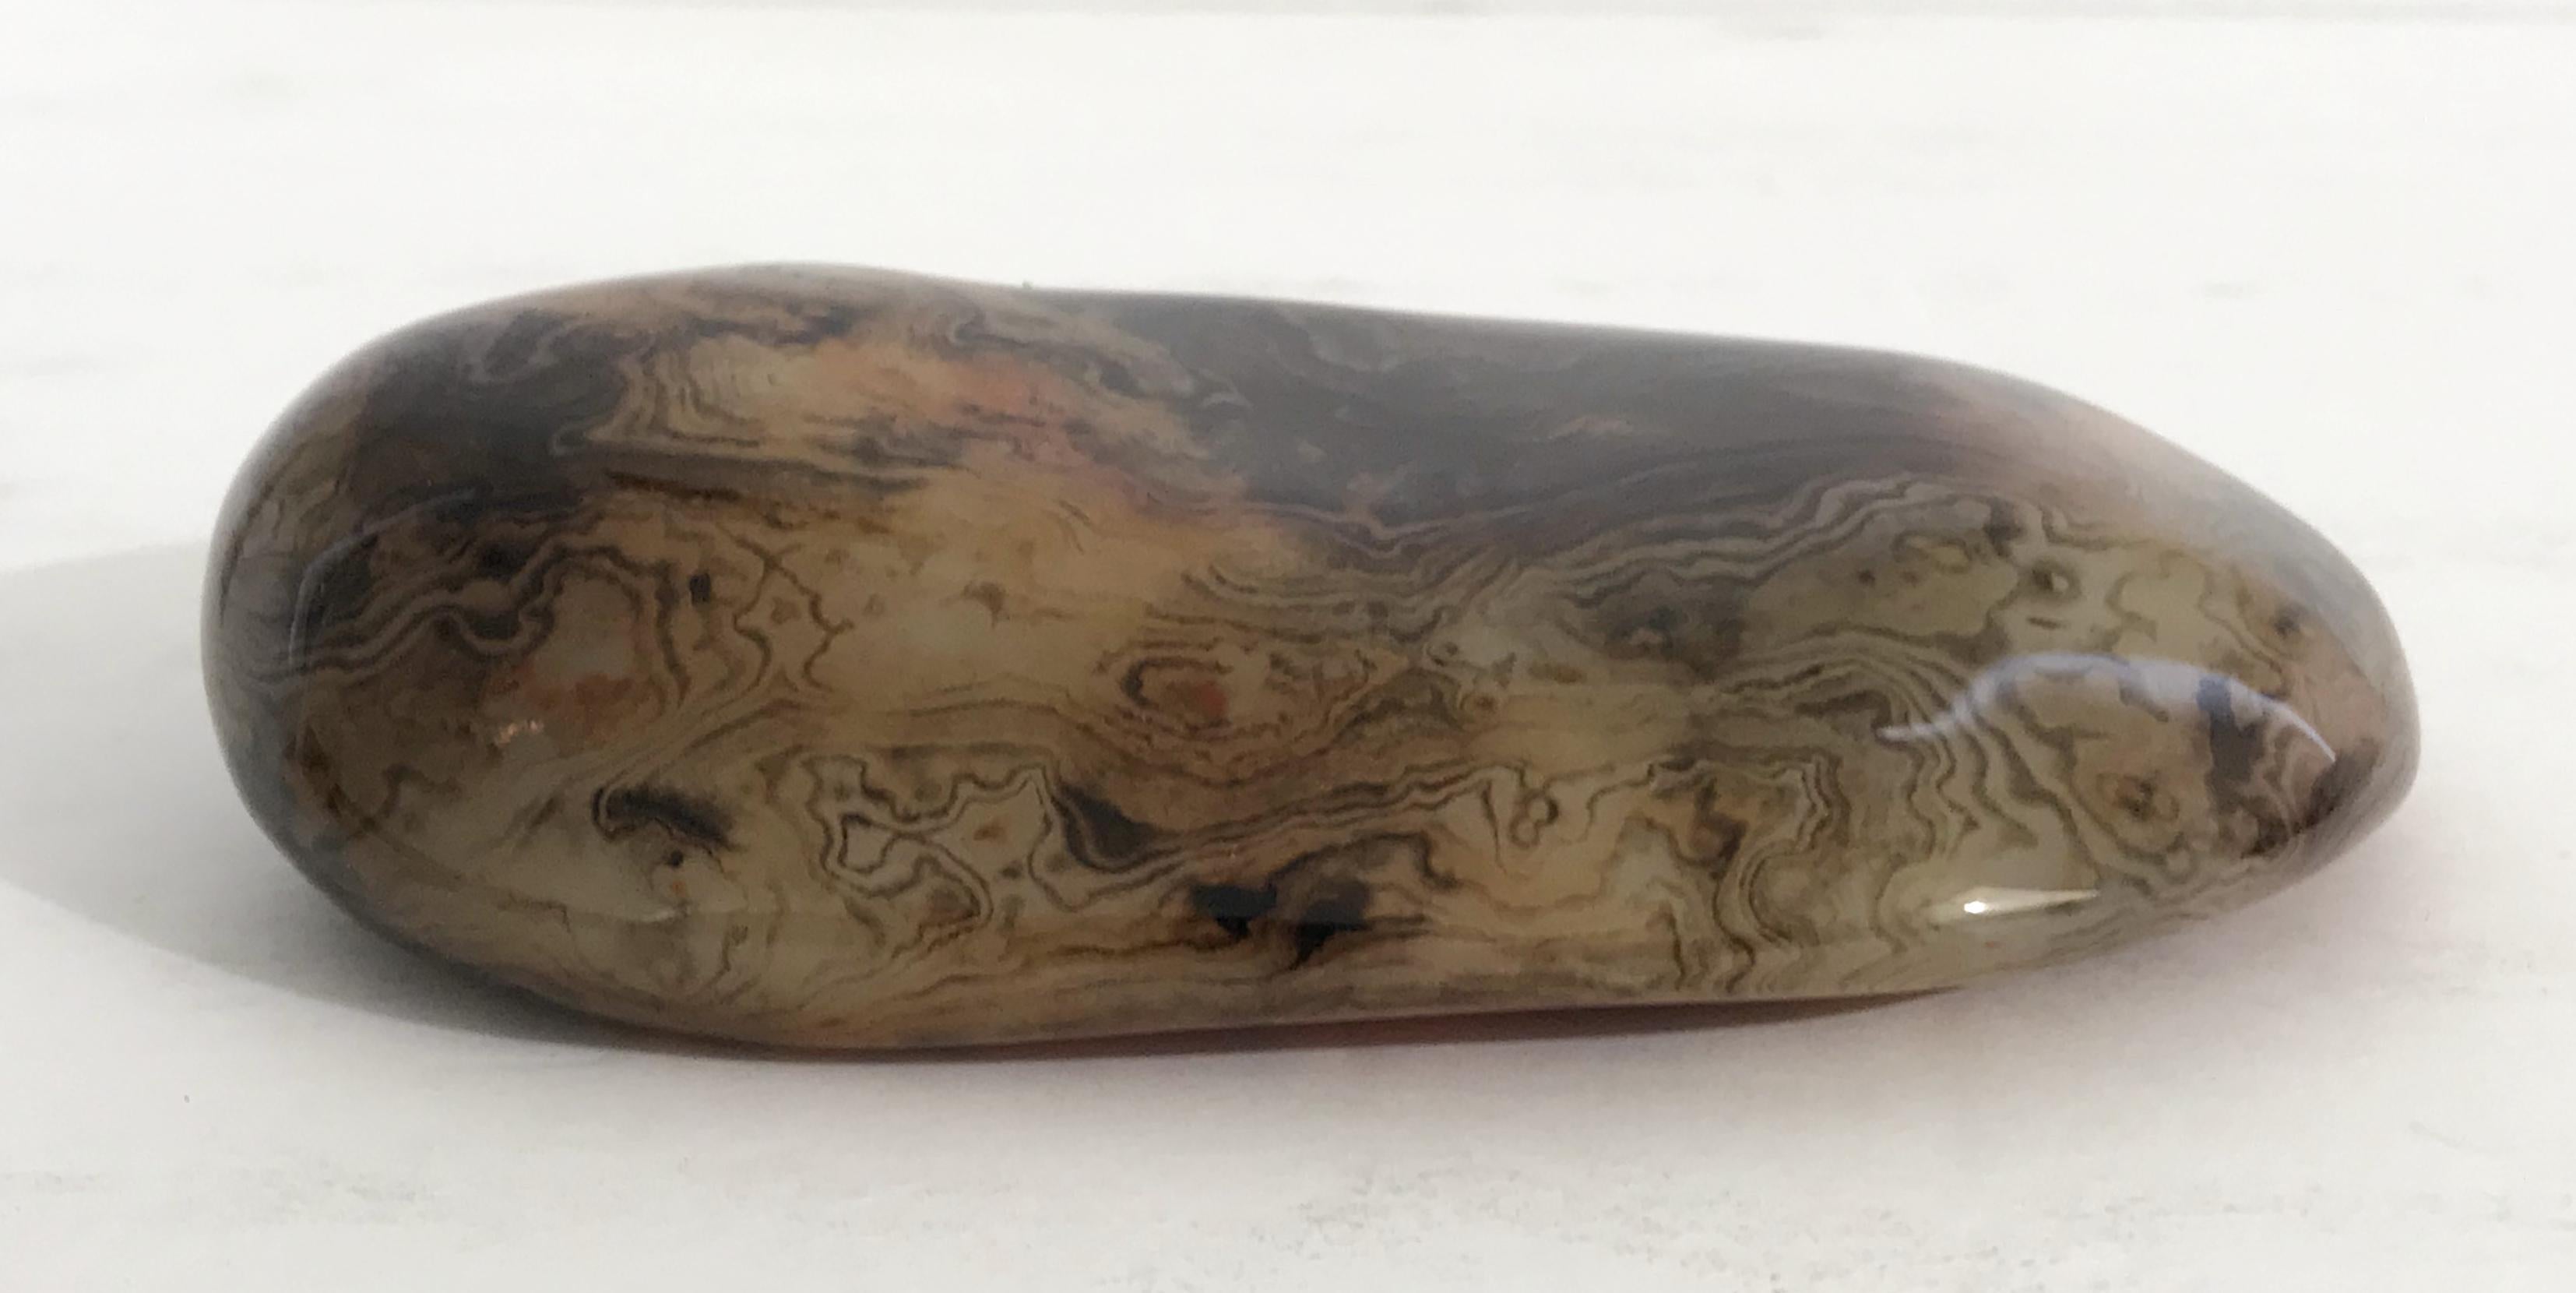 Hand polished agate onyx stone paperweight in black, brown, and red intricate layered patterns
Measures: length 5 inches, width 2.75 inches, height 1.25 inches
1 in stock in Palm Springs ON 50% OFF SALE for $225 !!
This piece makes for a great and